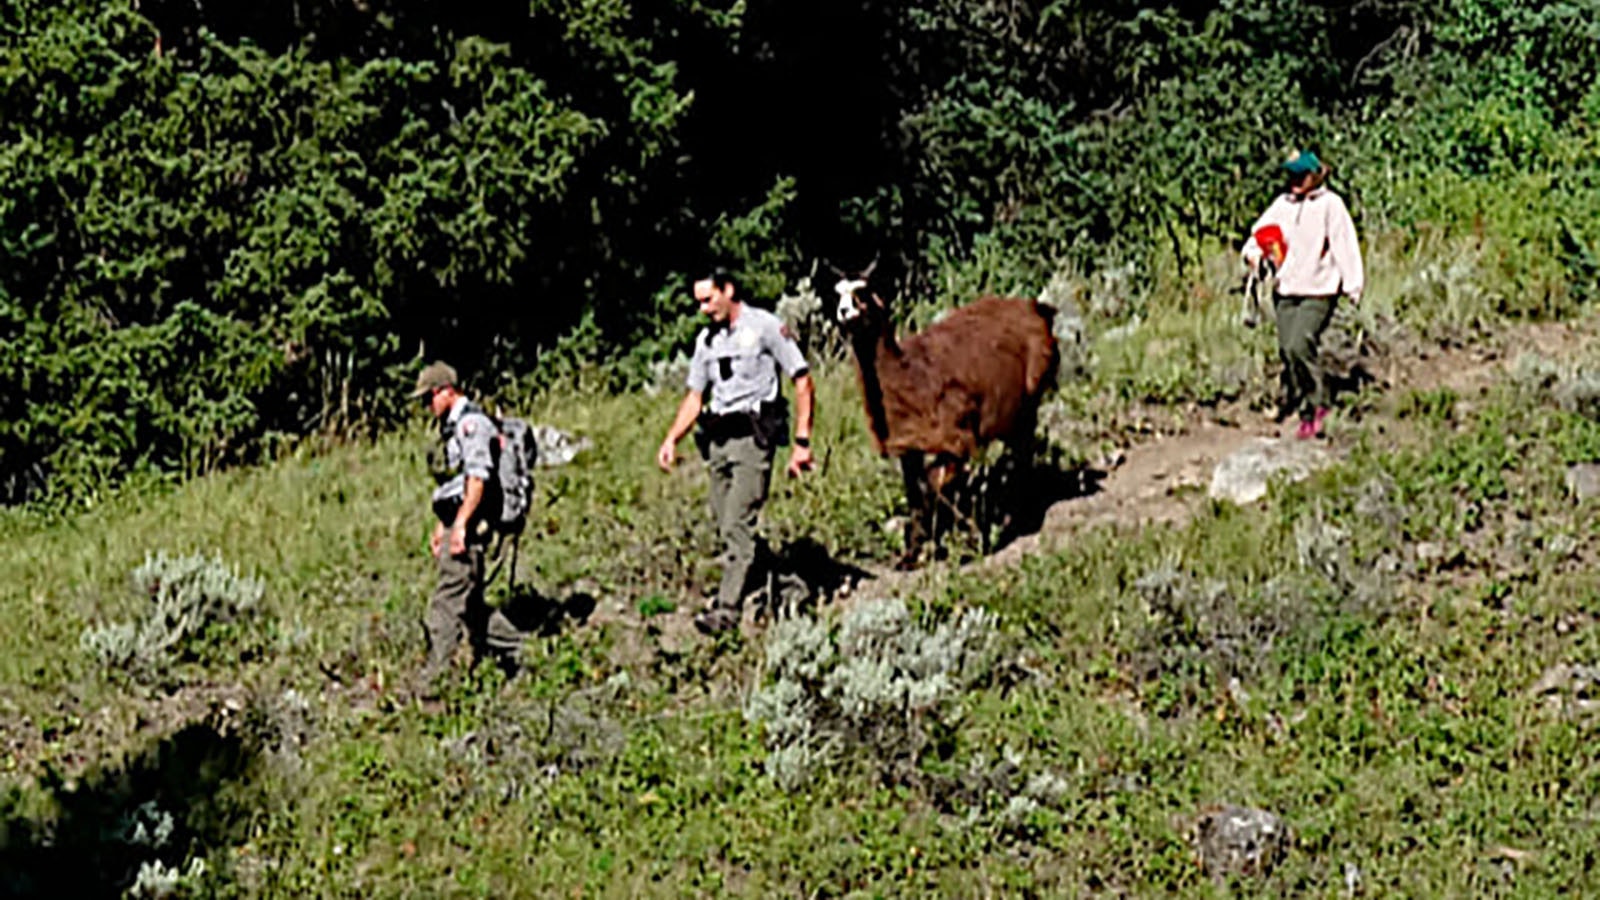 Joaquin, a pack llama lost in Yellowstone National Park for 17 days, is escorted back to civilization by his park ranger rescuers. The llama was spotted near Trout Lake, not far from the spot where his pack trip was encamped at the time he bolted and ran off. He had been spotted by Trout Lake once before, but visitors were not able to recover him.